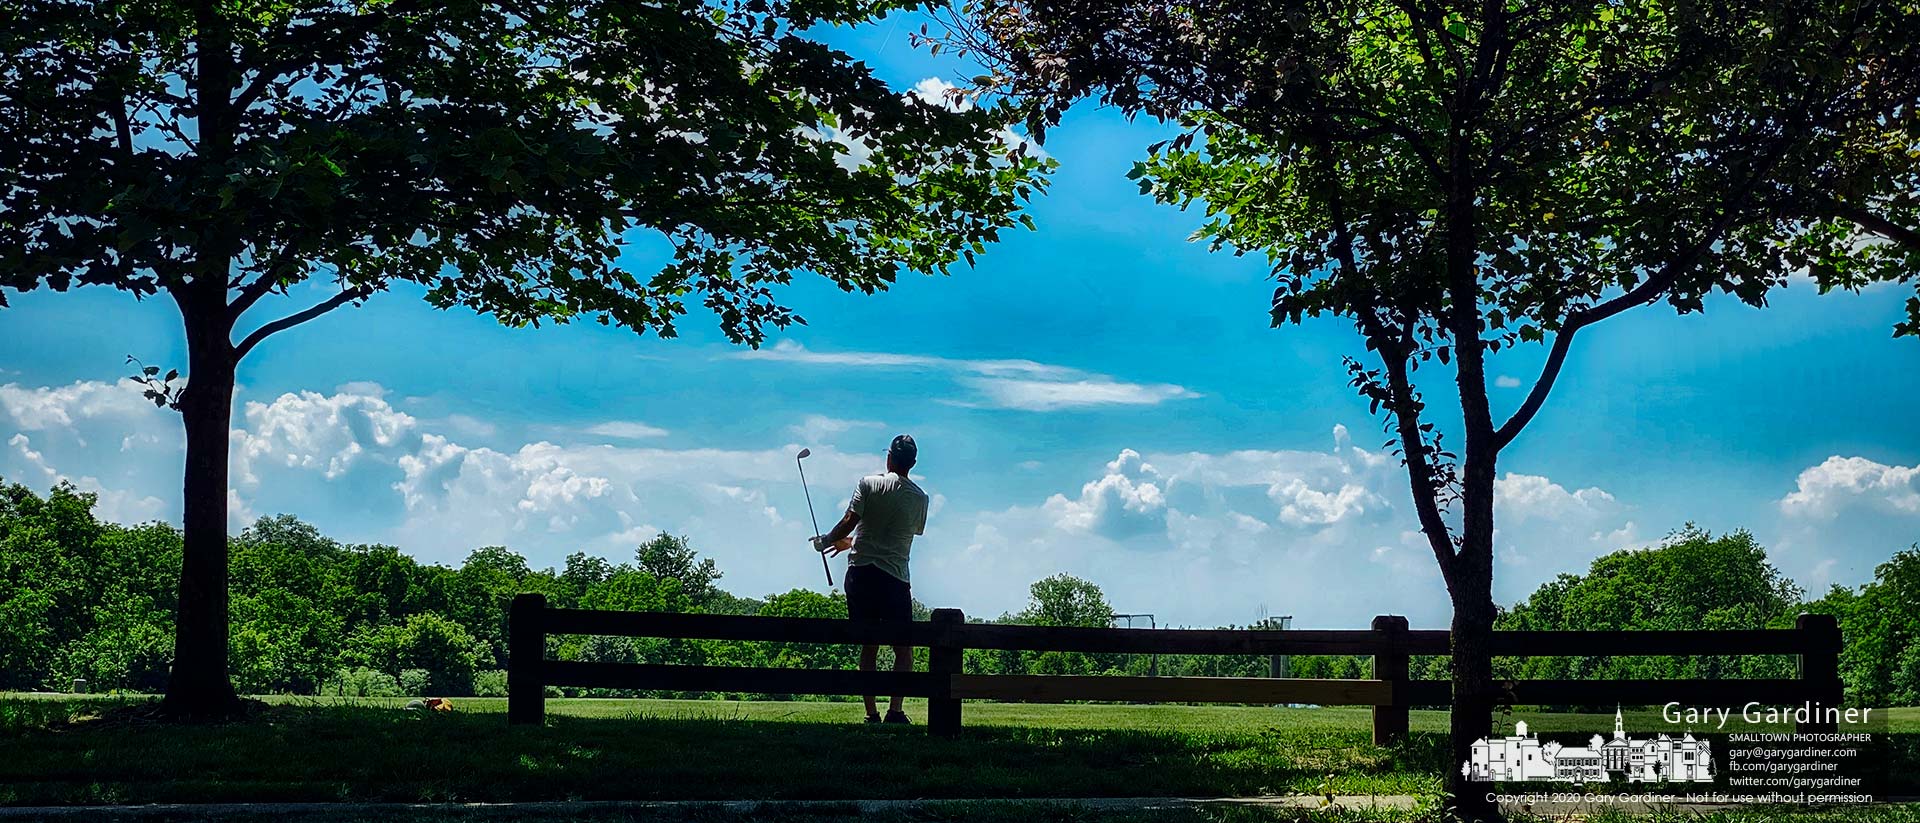 A golfer strikes a few practice balls from the edge of a field at Otterbein University as he prepares for a match against his son the next day. My Final Photo for June 20, 2020.